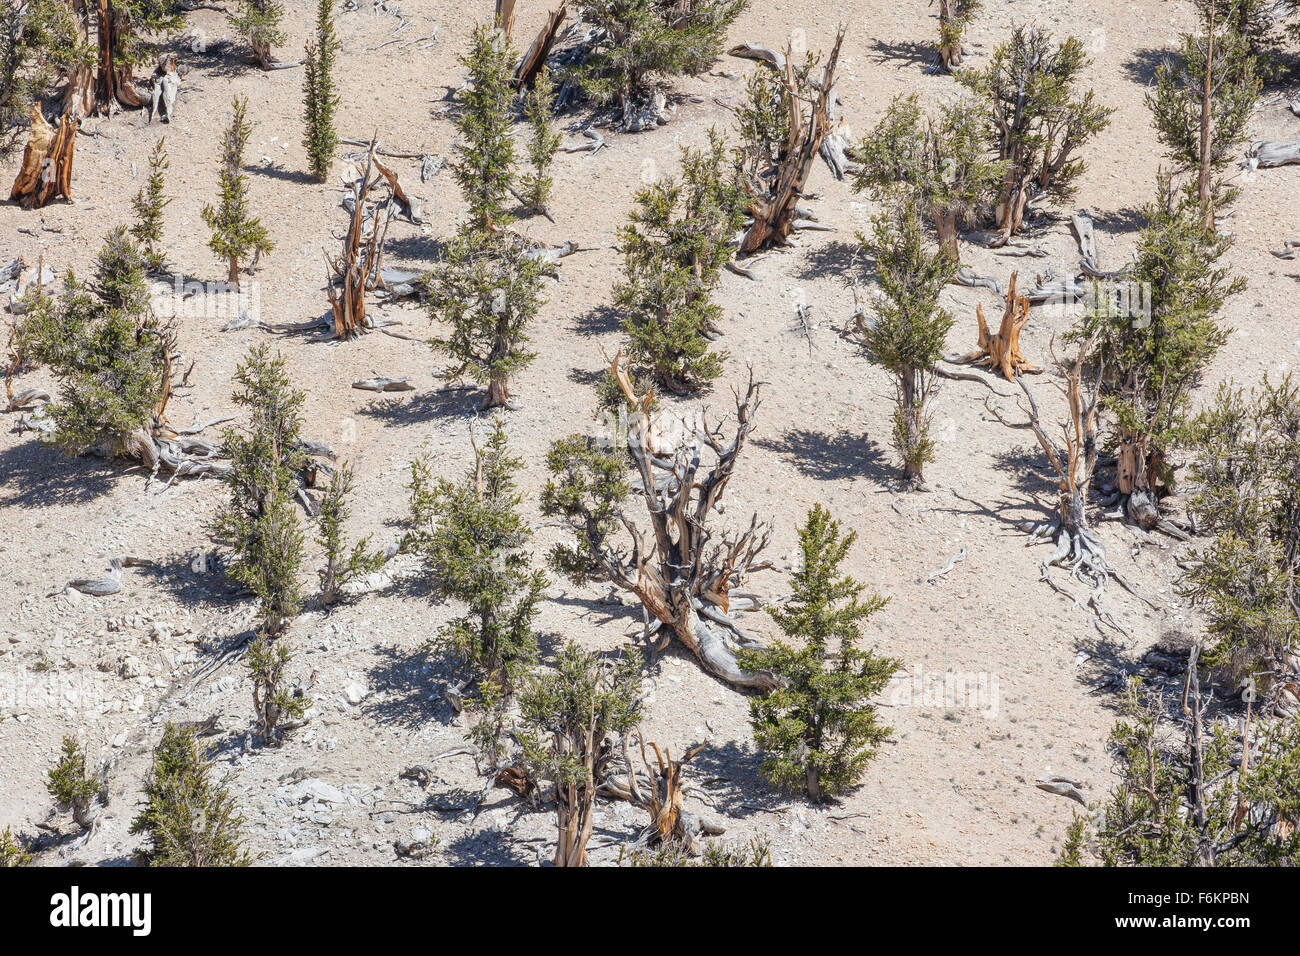 Ancient Bristlecone Pine Forest, California, USA.  Bristlecone pines are among the few plants that can tolerate the high elevati Stock Photo